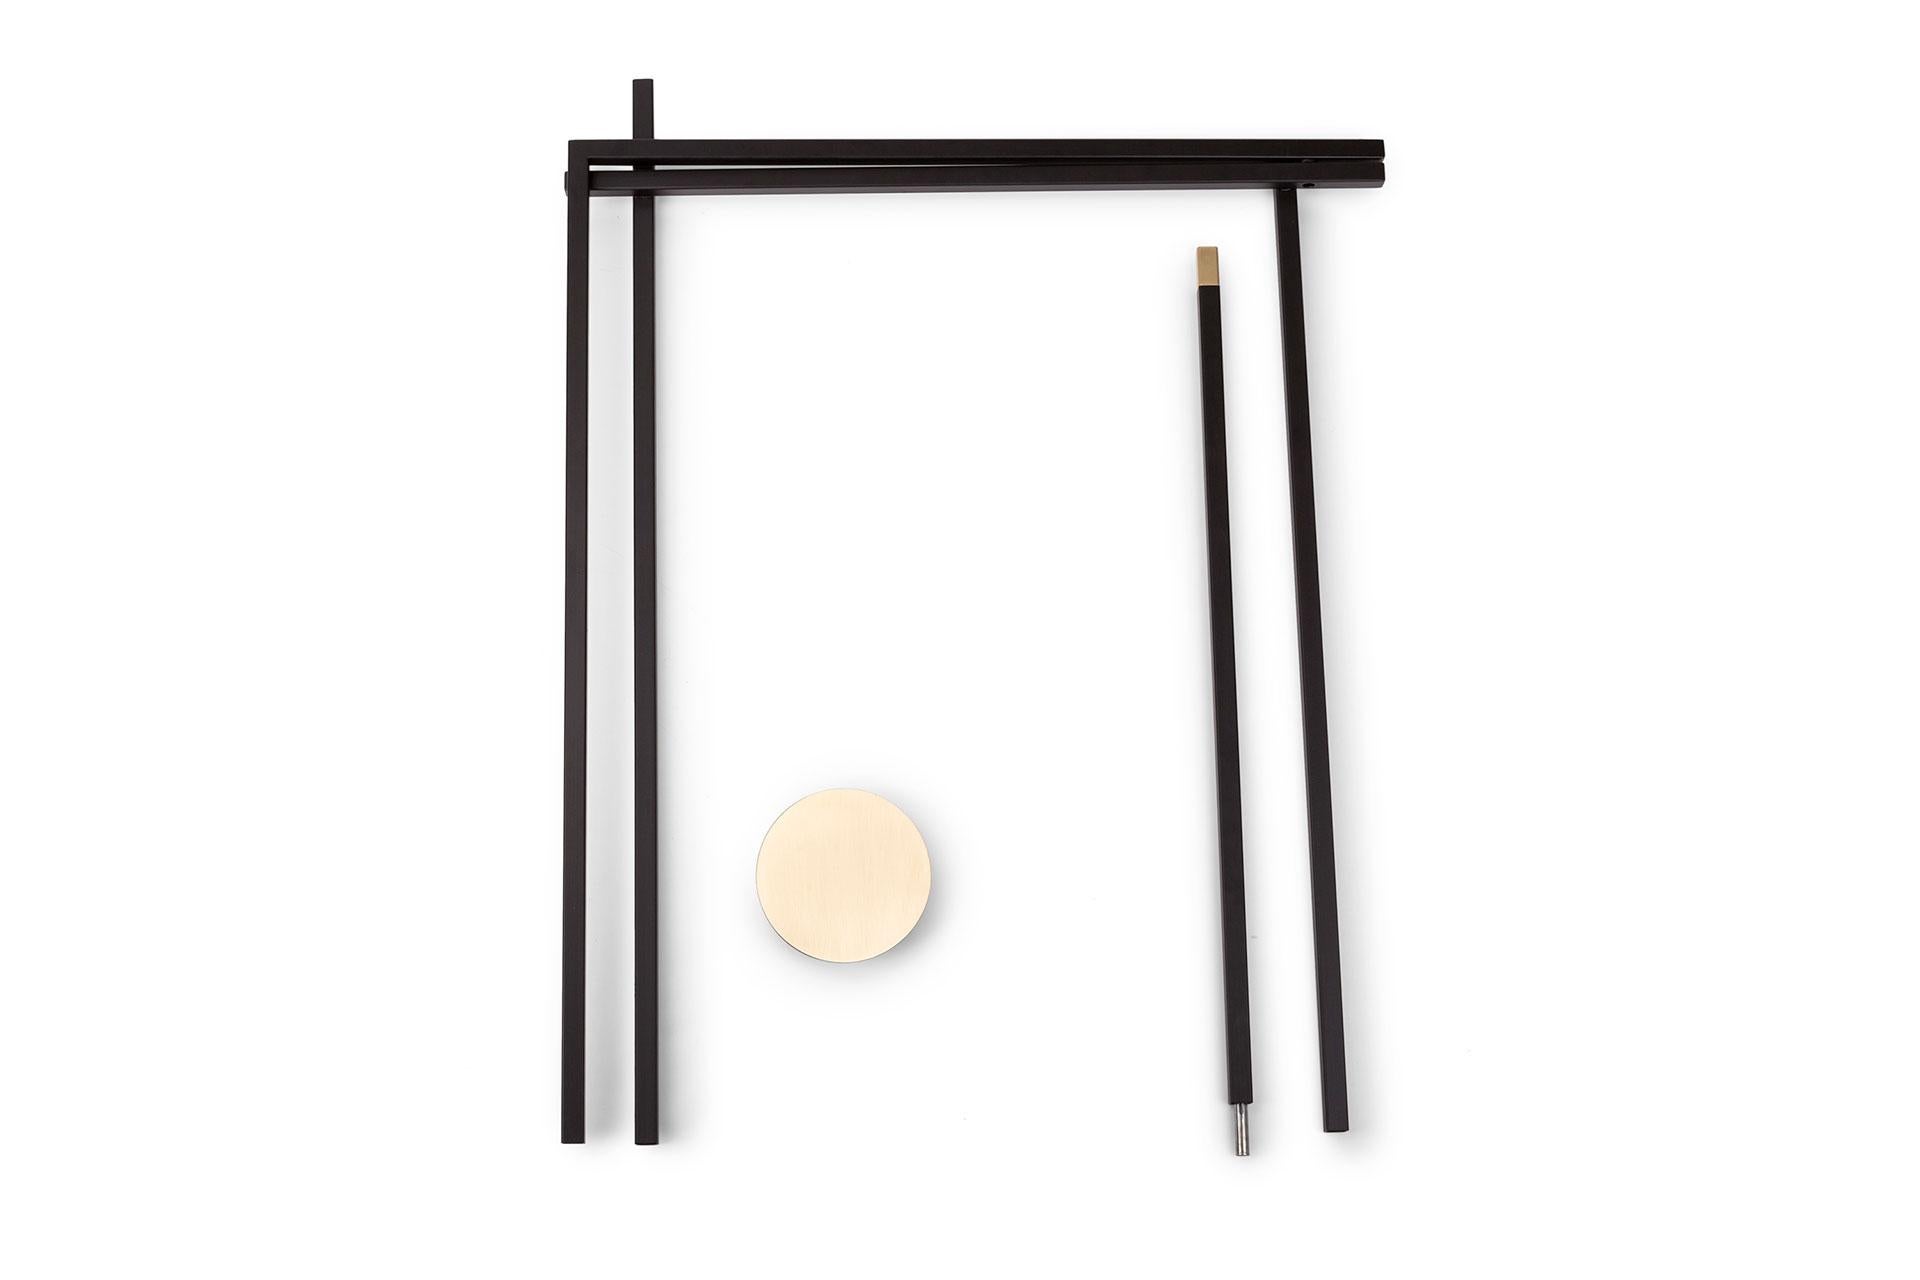 Asse Zeta clothes stand by Mingardo.
Dimensions: D170 x W77 x H100 cm.
Materials: Ral 9005 black varnished iron structure and satin natural brass details.
Weight: 8 kg
Also Available in different finishes. 

Segments mark systems from a point